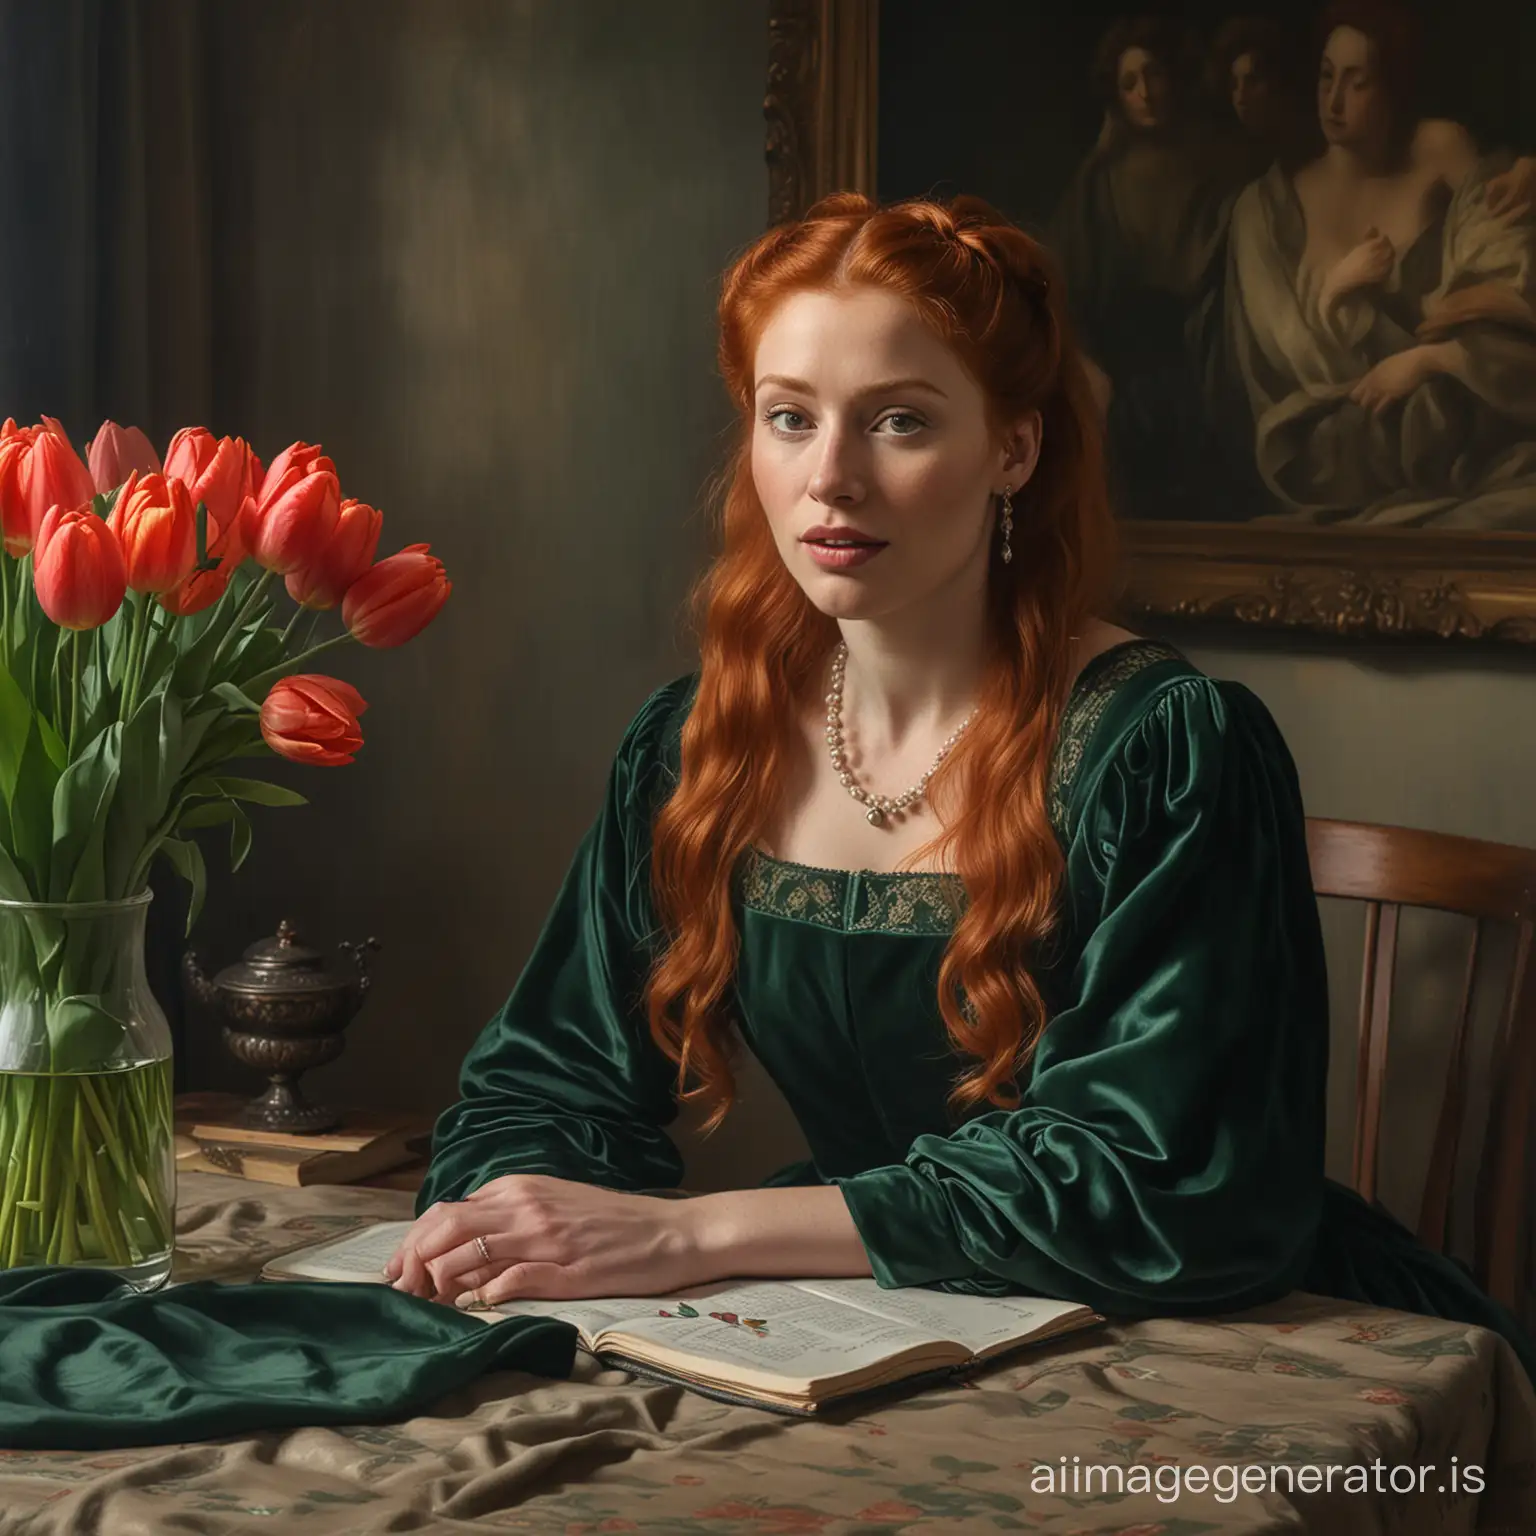 Masterpiece, a large red-haired woman of about 40 with large features, thick lips, hair tied at the back of her head, in a dark green velvet dress sits at a small table, a bouquet of tulips lies on the table in front of her, complex dramatic lighting, oil on canvas, brush strokes